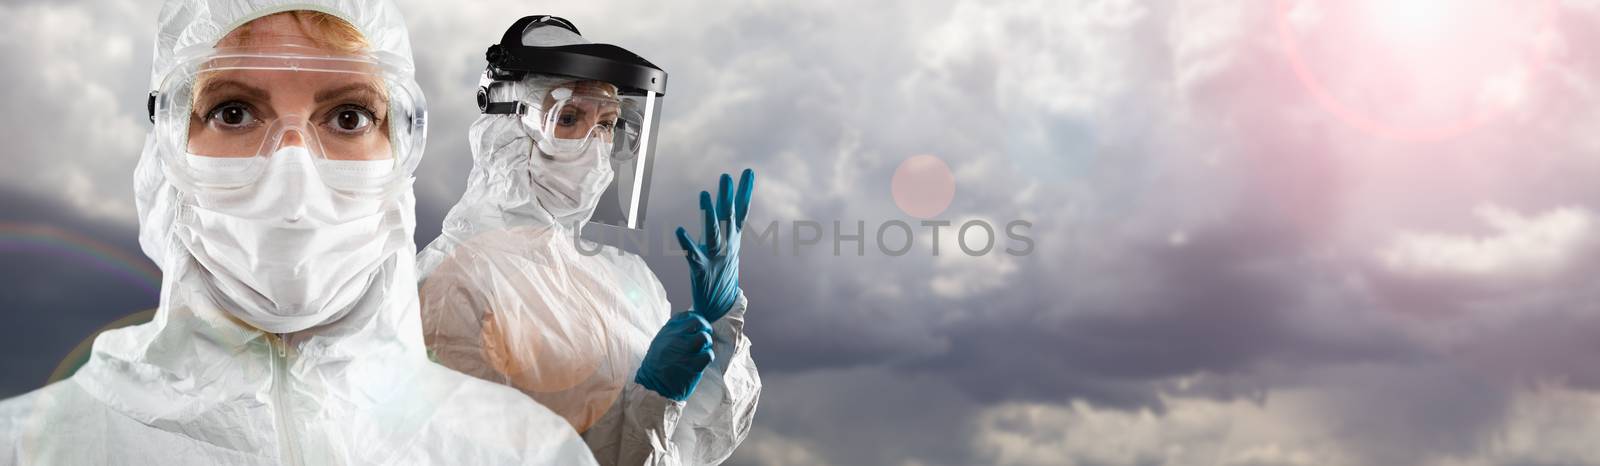 Doctor or Nurse Wearing Personal Protective Equipment Over Stormy Clouds Banner.